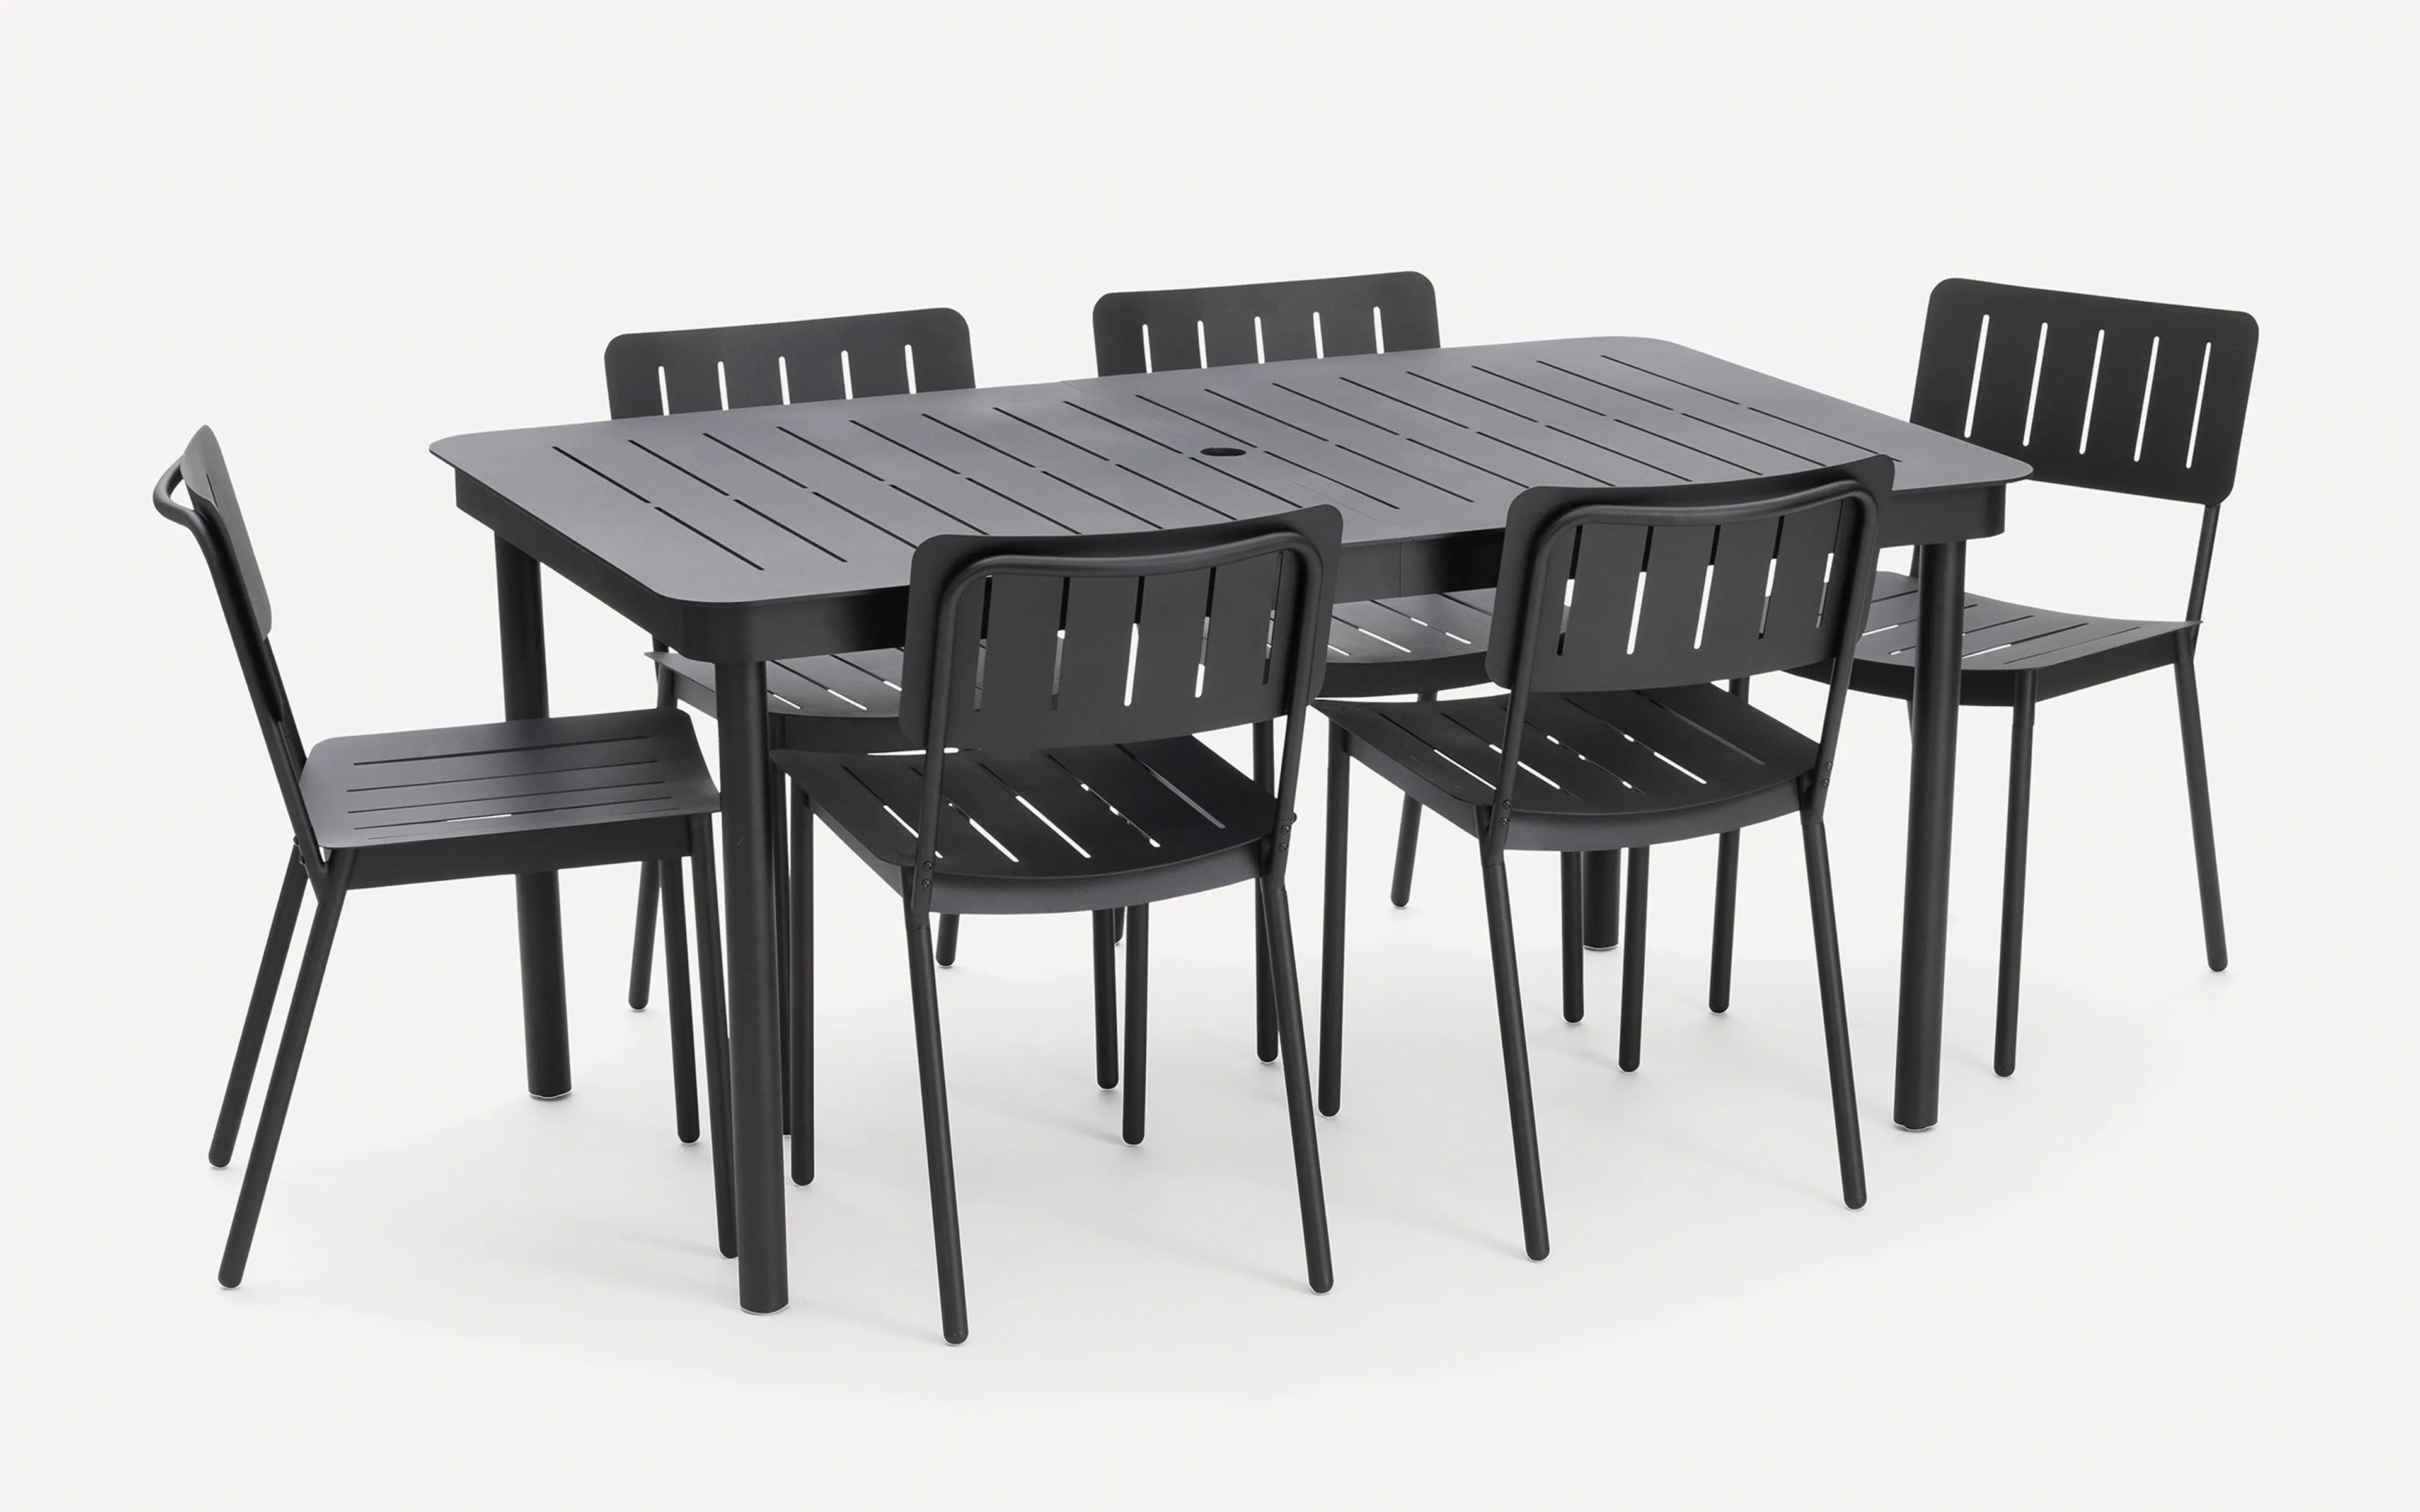 Relay Outdoor Dining Set, Table & 6 Chairs